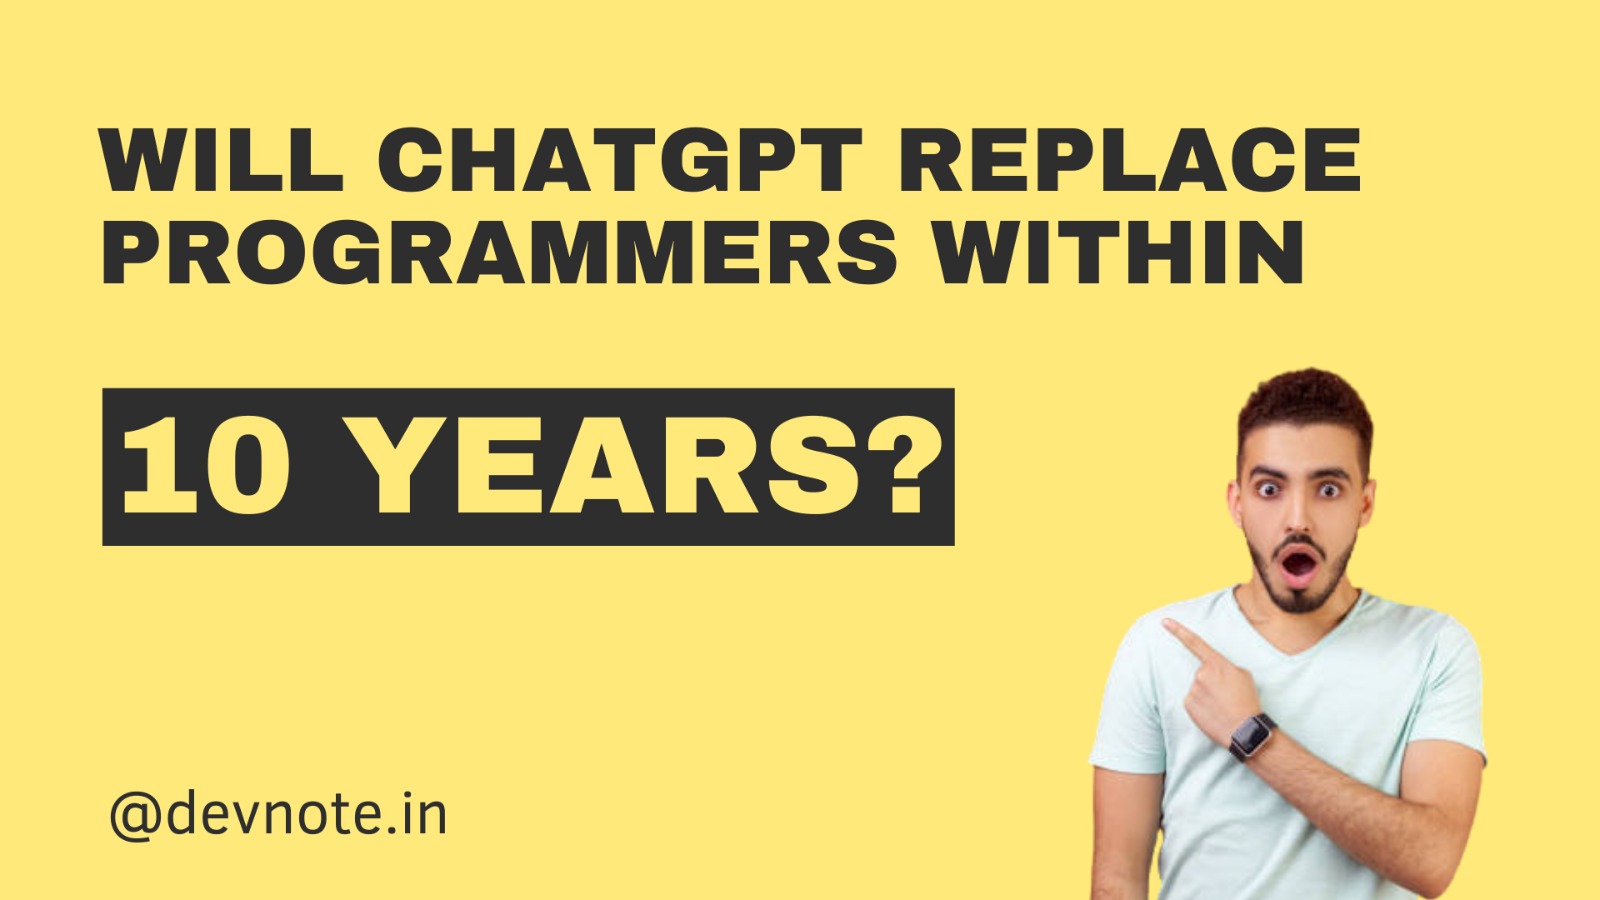 Will ChatGPT Replace Programmers Within 10 Years?